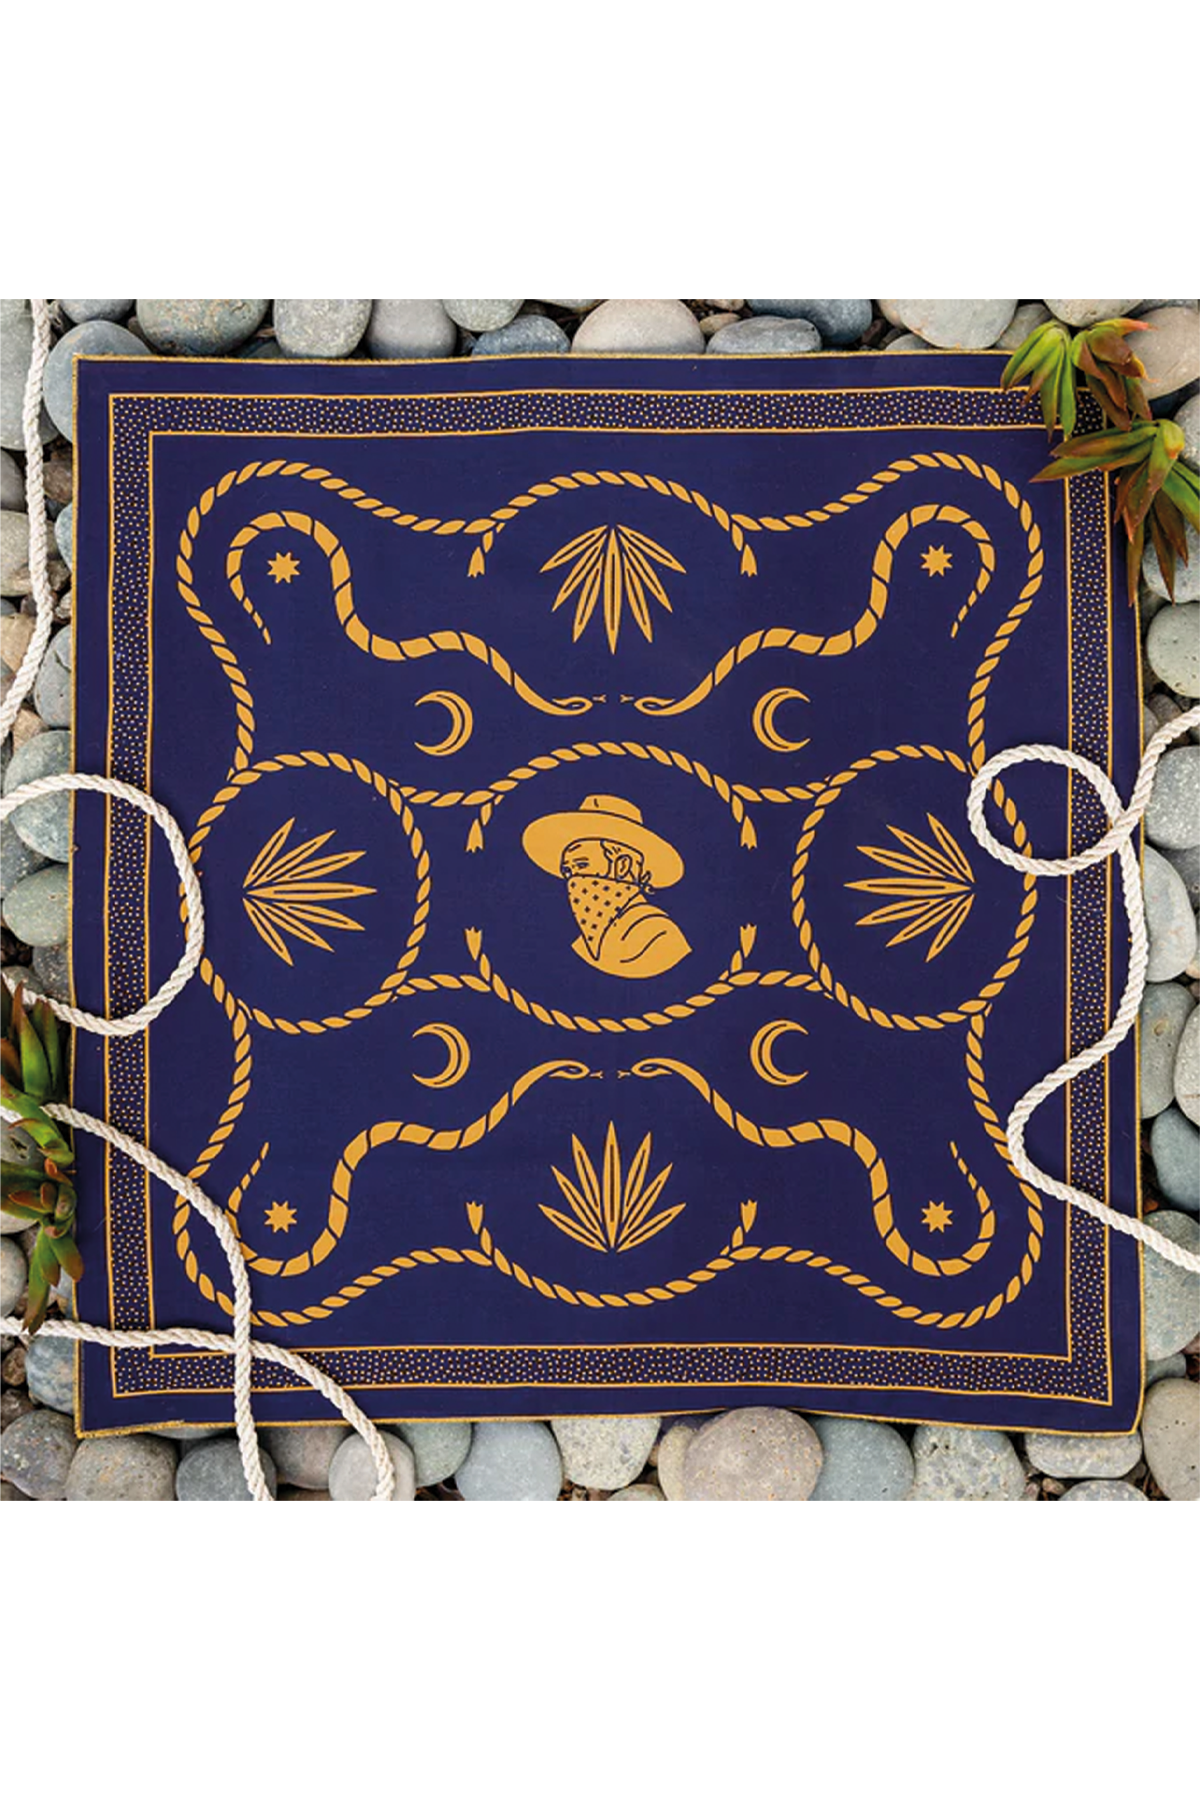 Bandits - Special Edition "Heritage" Bandana in Blue